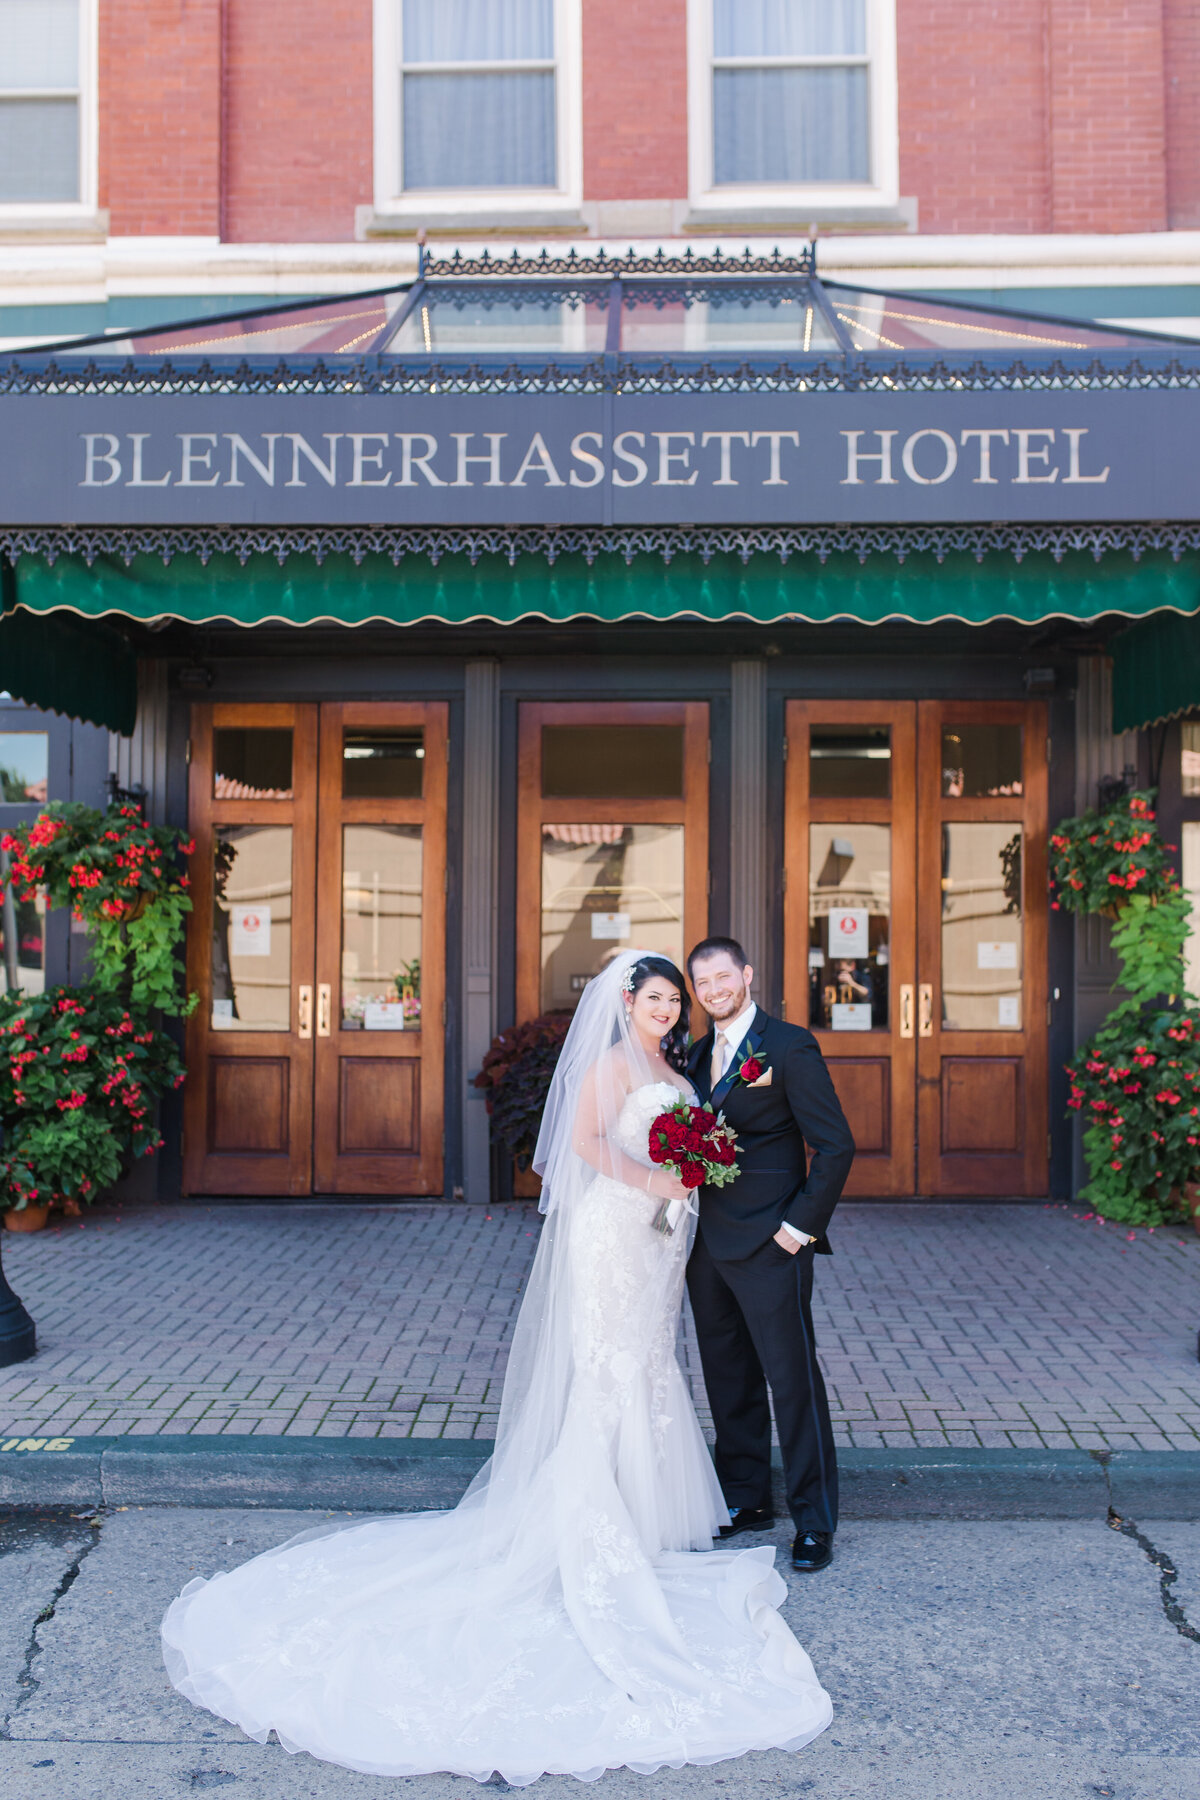 Classic black, white and red wedding at Blennerhassett Hotel